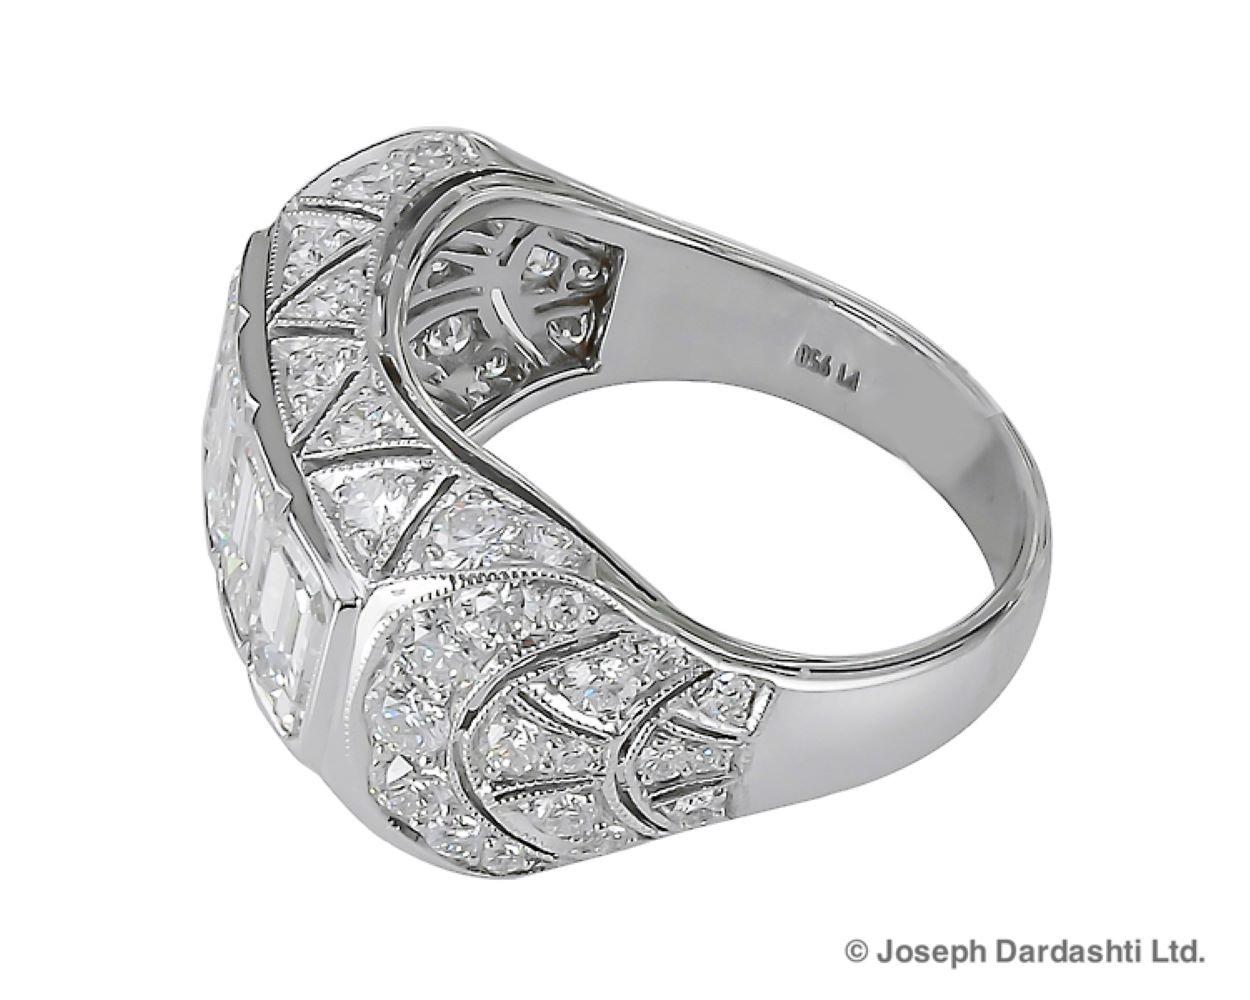 An art deco platinum ring with 4 emerald cut diamonds that weighs approximately 2.07 carat and accentuated with 1.25 carat of small diamonds.

Sophia D by Joseph Dardashti LTD has been known worldwide for 35 years and are inspired by classic Art